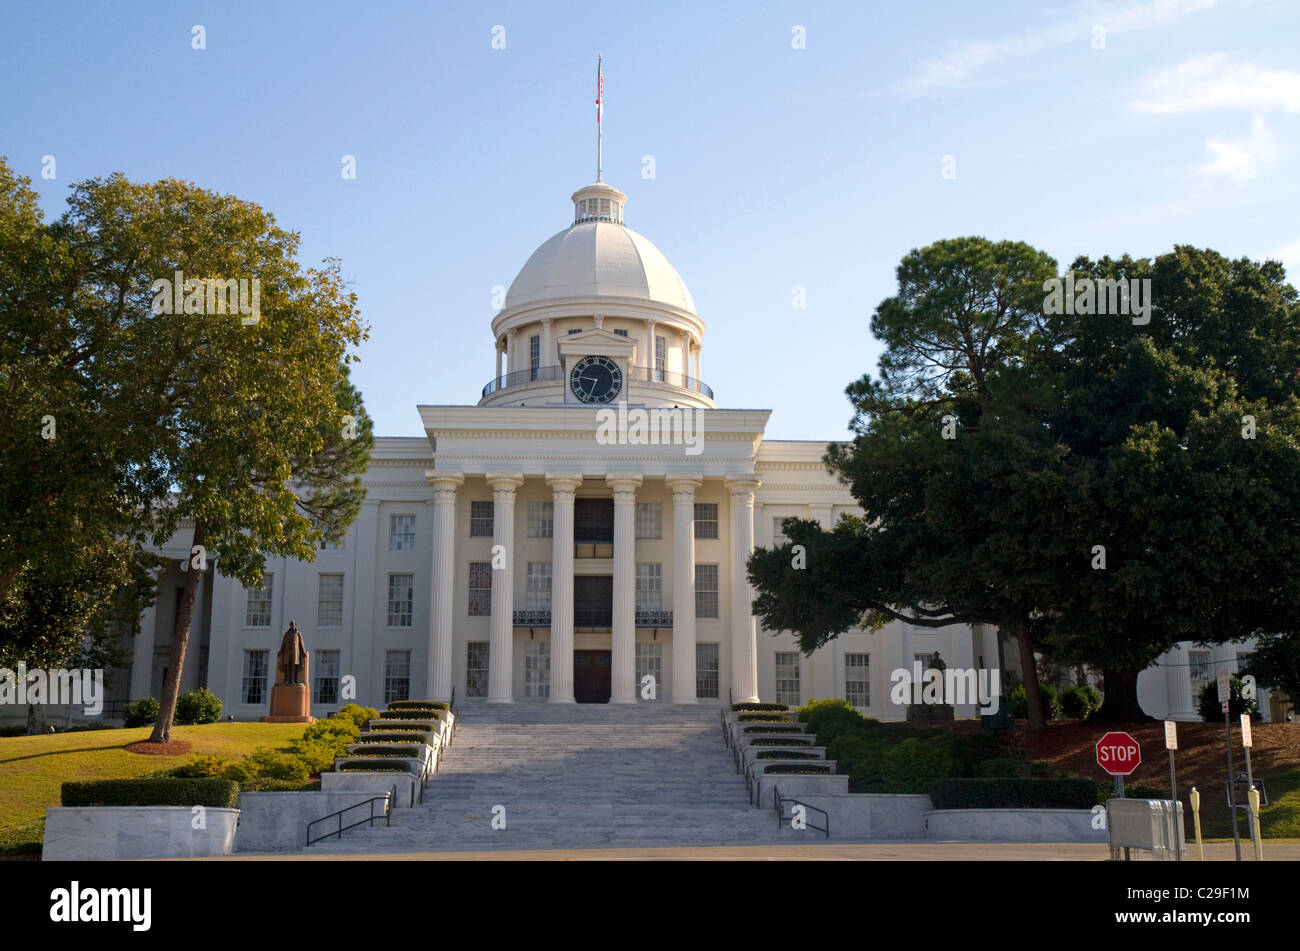 The Alabama State Capitol Building located on Goat Hill in Montgomery, Alabama, USA. Stock Photo